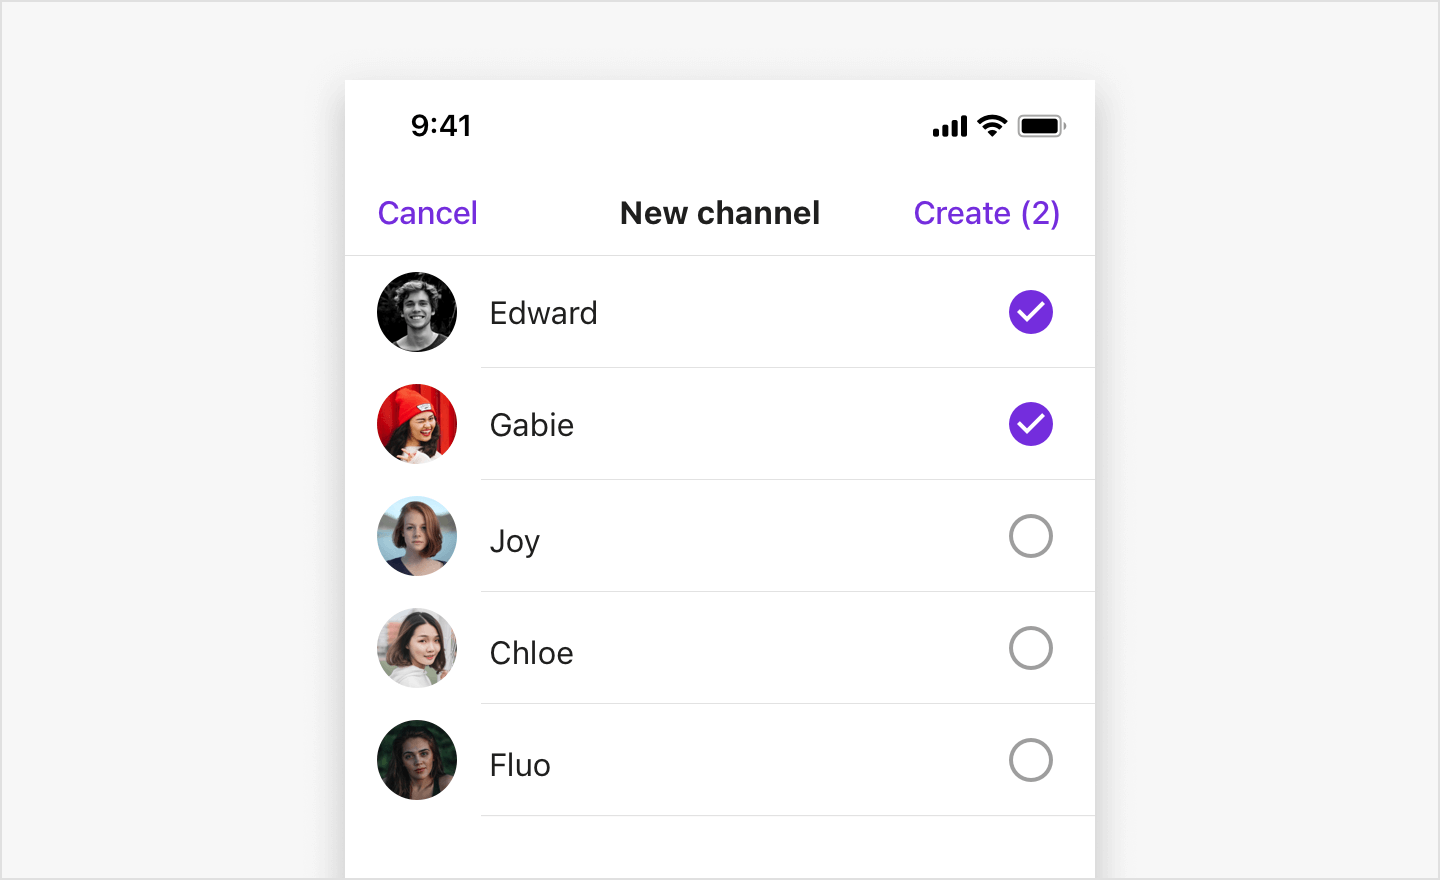 Image|Two users are selected from the user list in the New channel view.